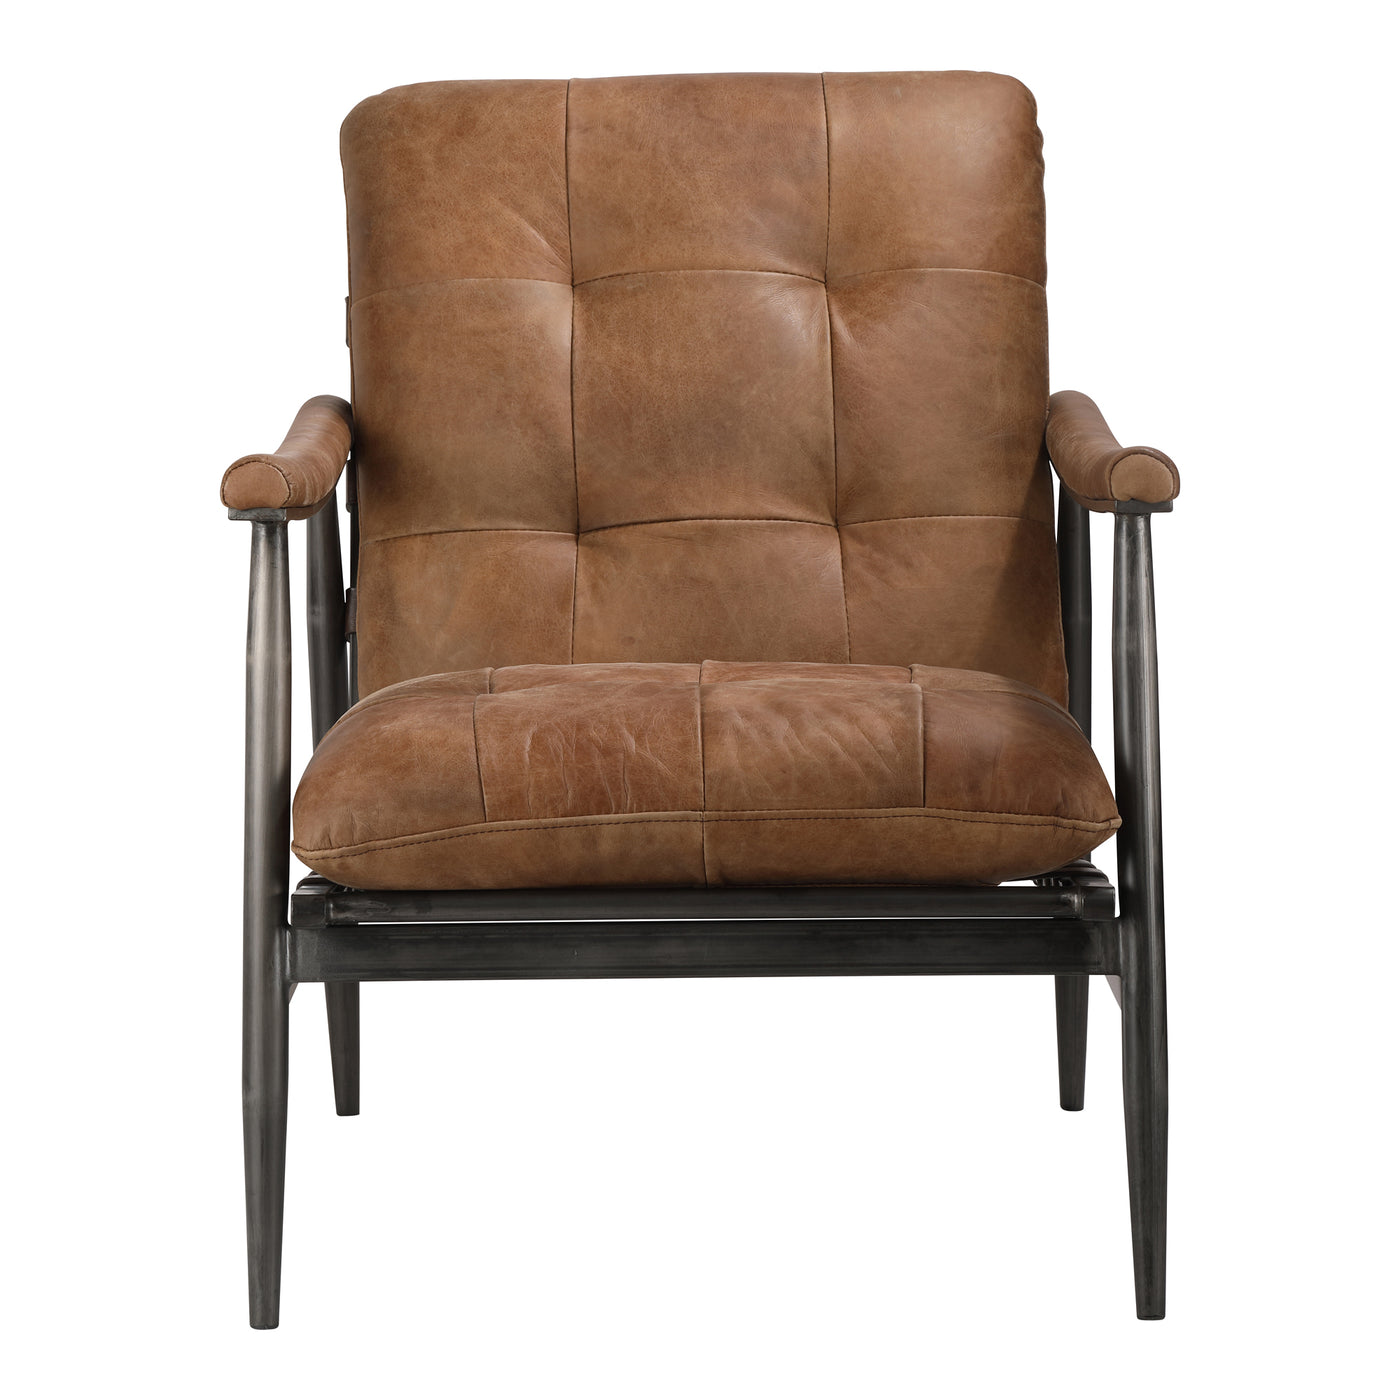 Sophisticated luxe seating in buttery soft top-grain leather. The Shubert accent chair features beautifully patinaed top-g...